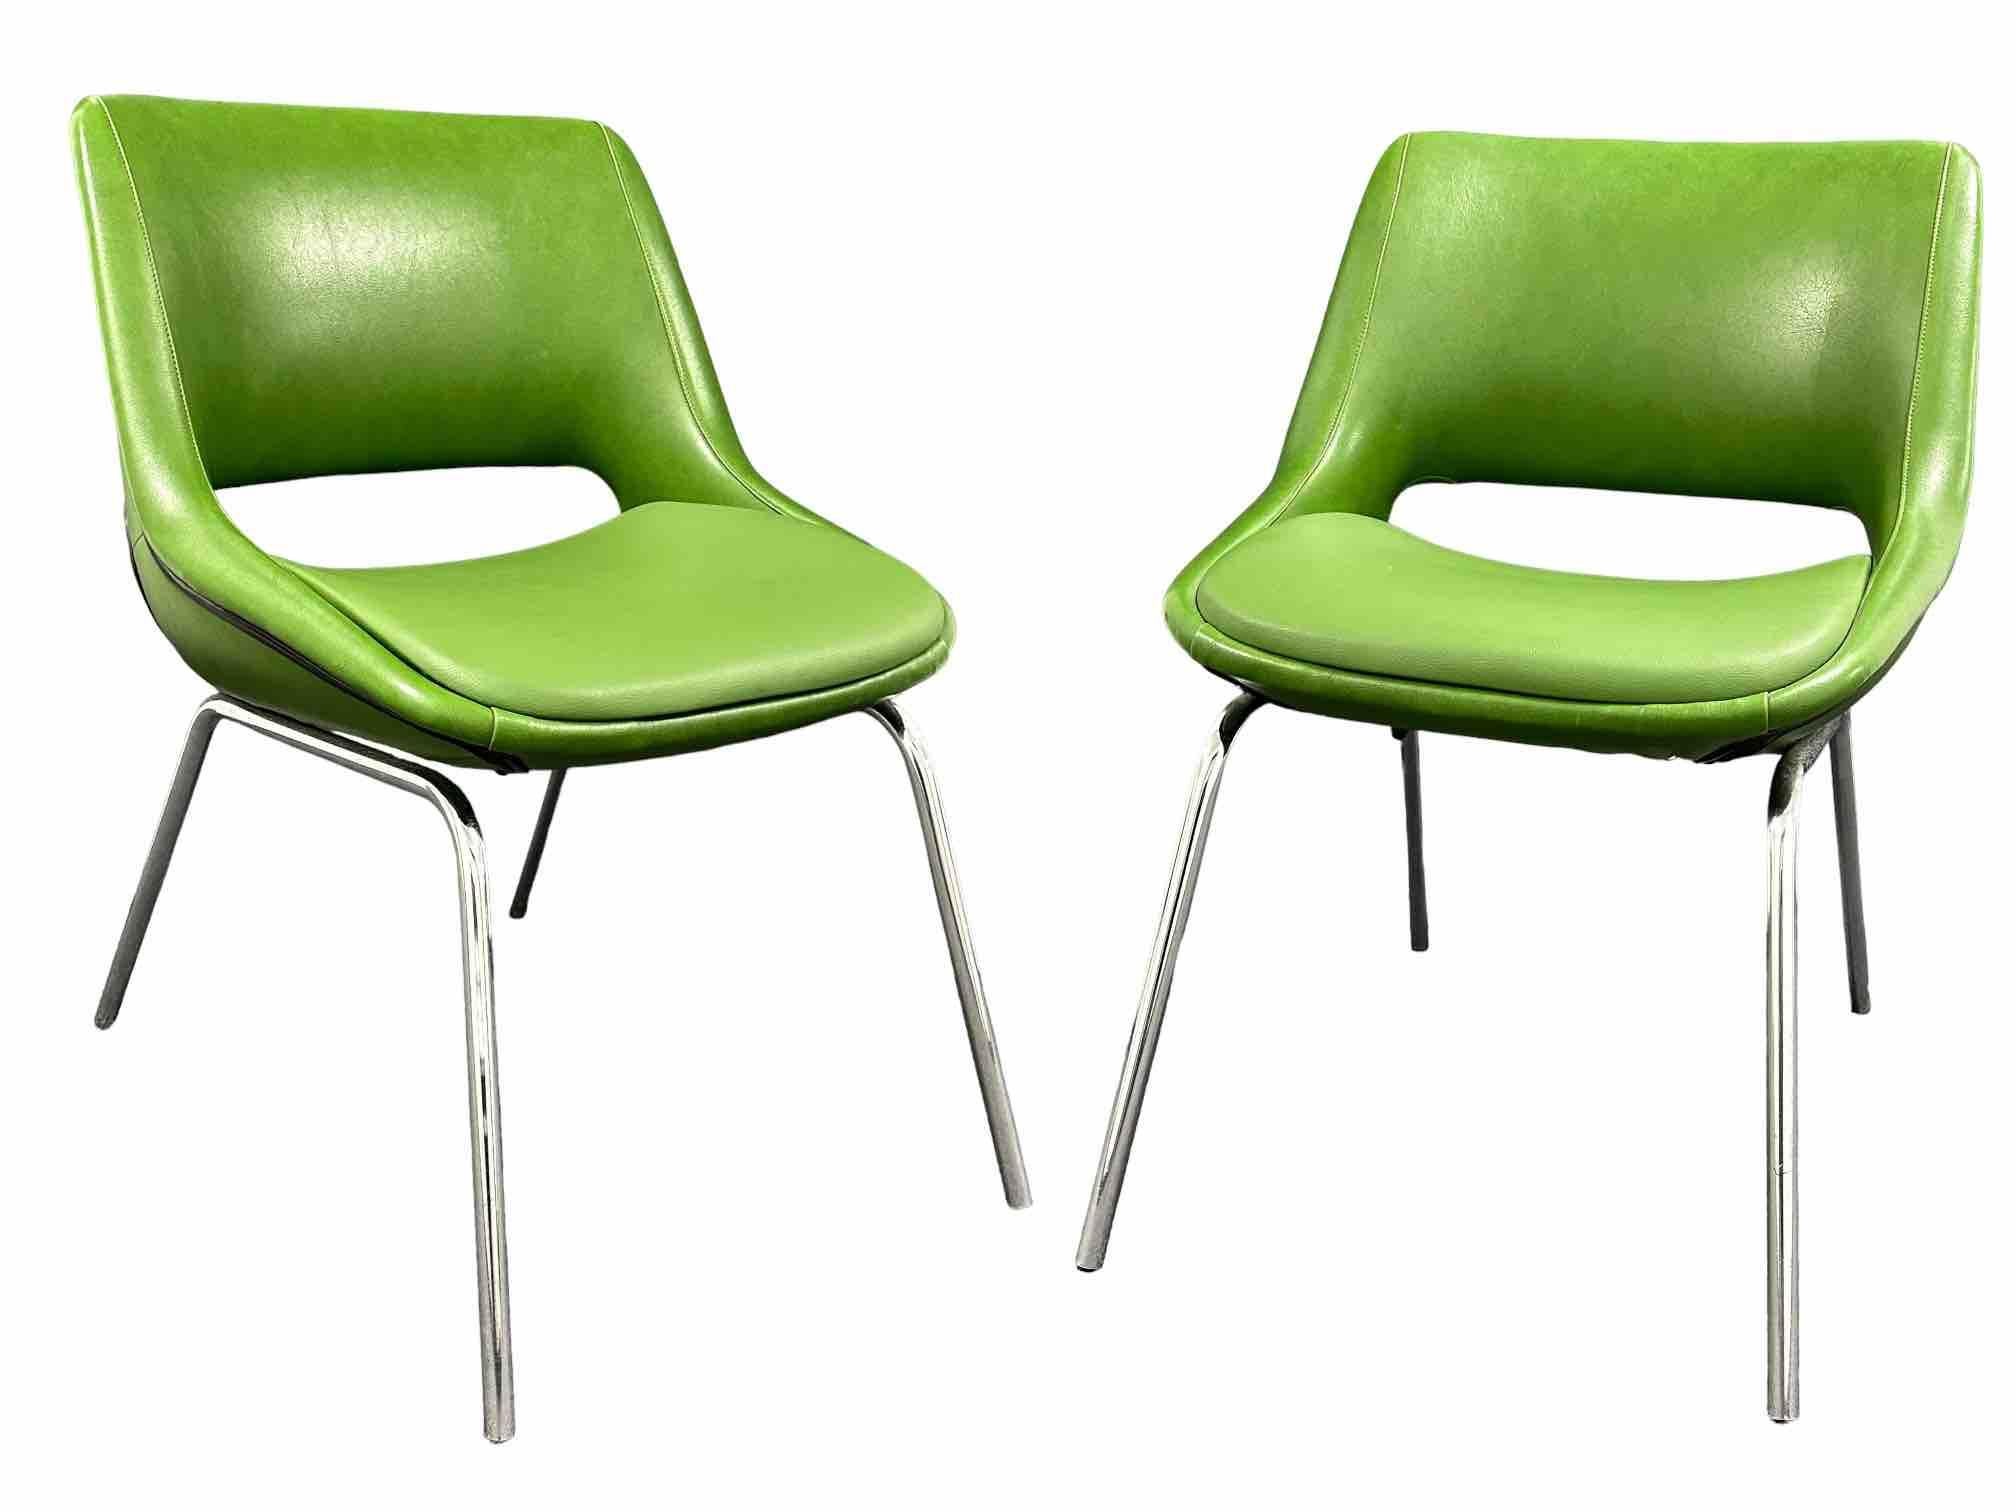 Two Chrome Base, Green Faux Leather Chairs Made by Blaha, Austria, 1970s In Good Condition For Sale In Nuernberg, DE